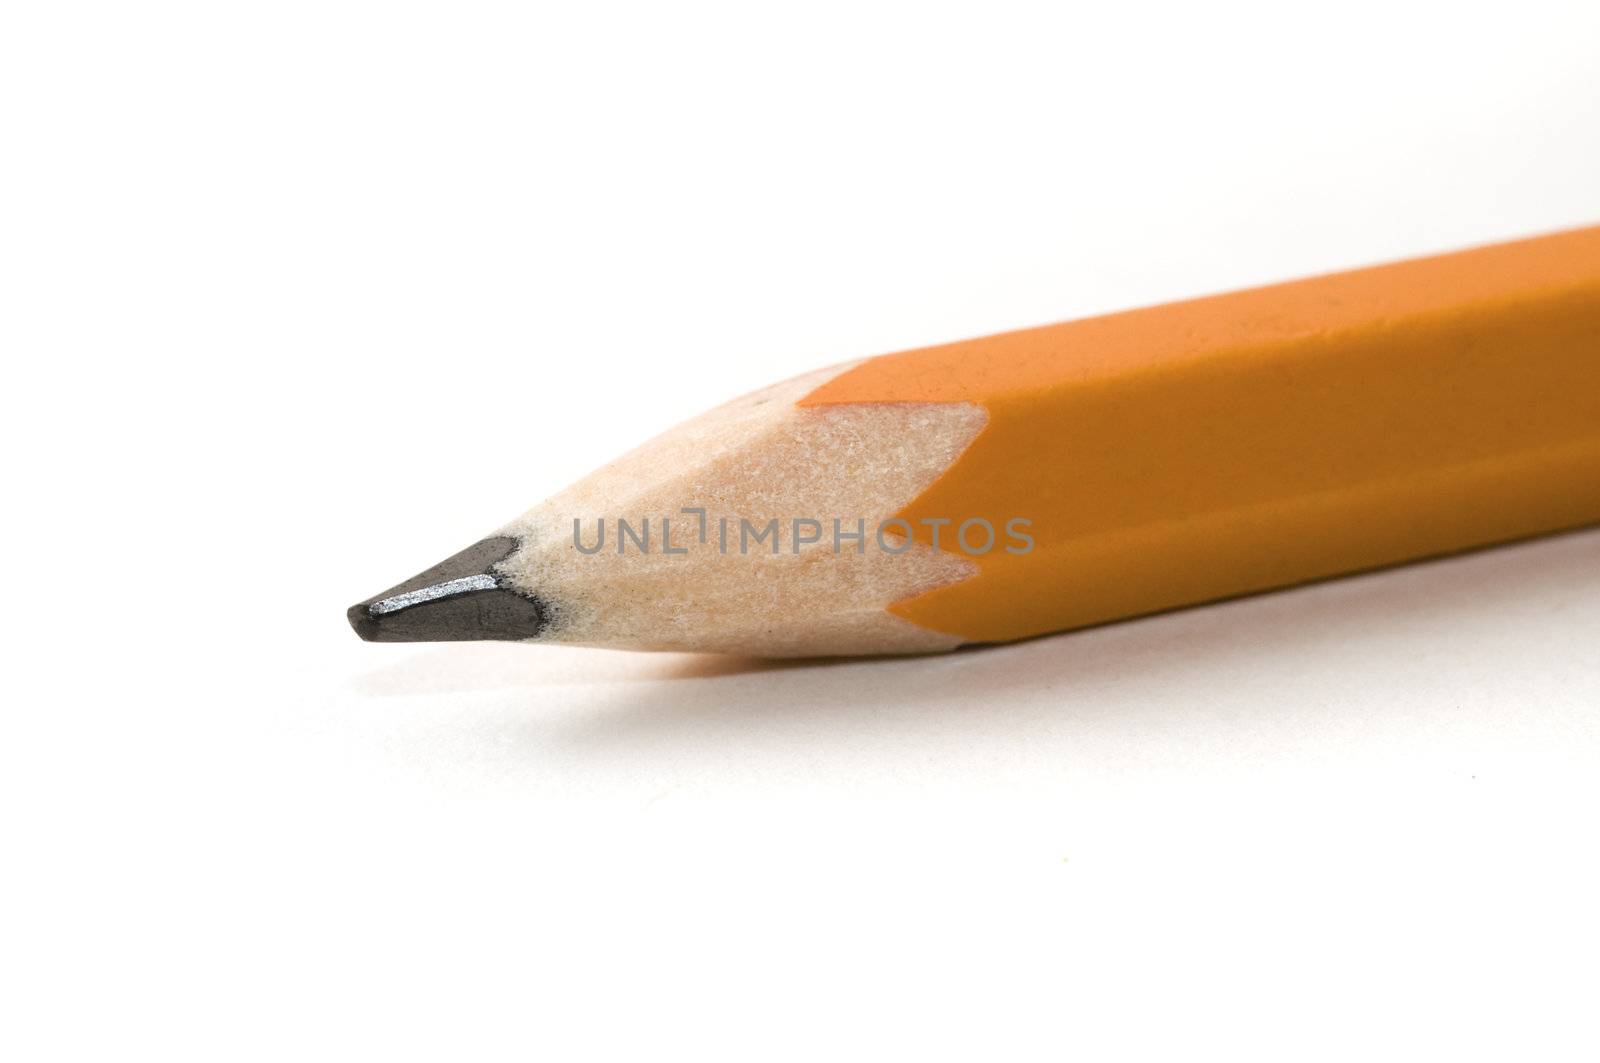 Macro image of the sharpened end of a HB pencil